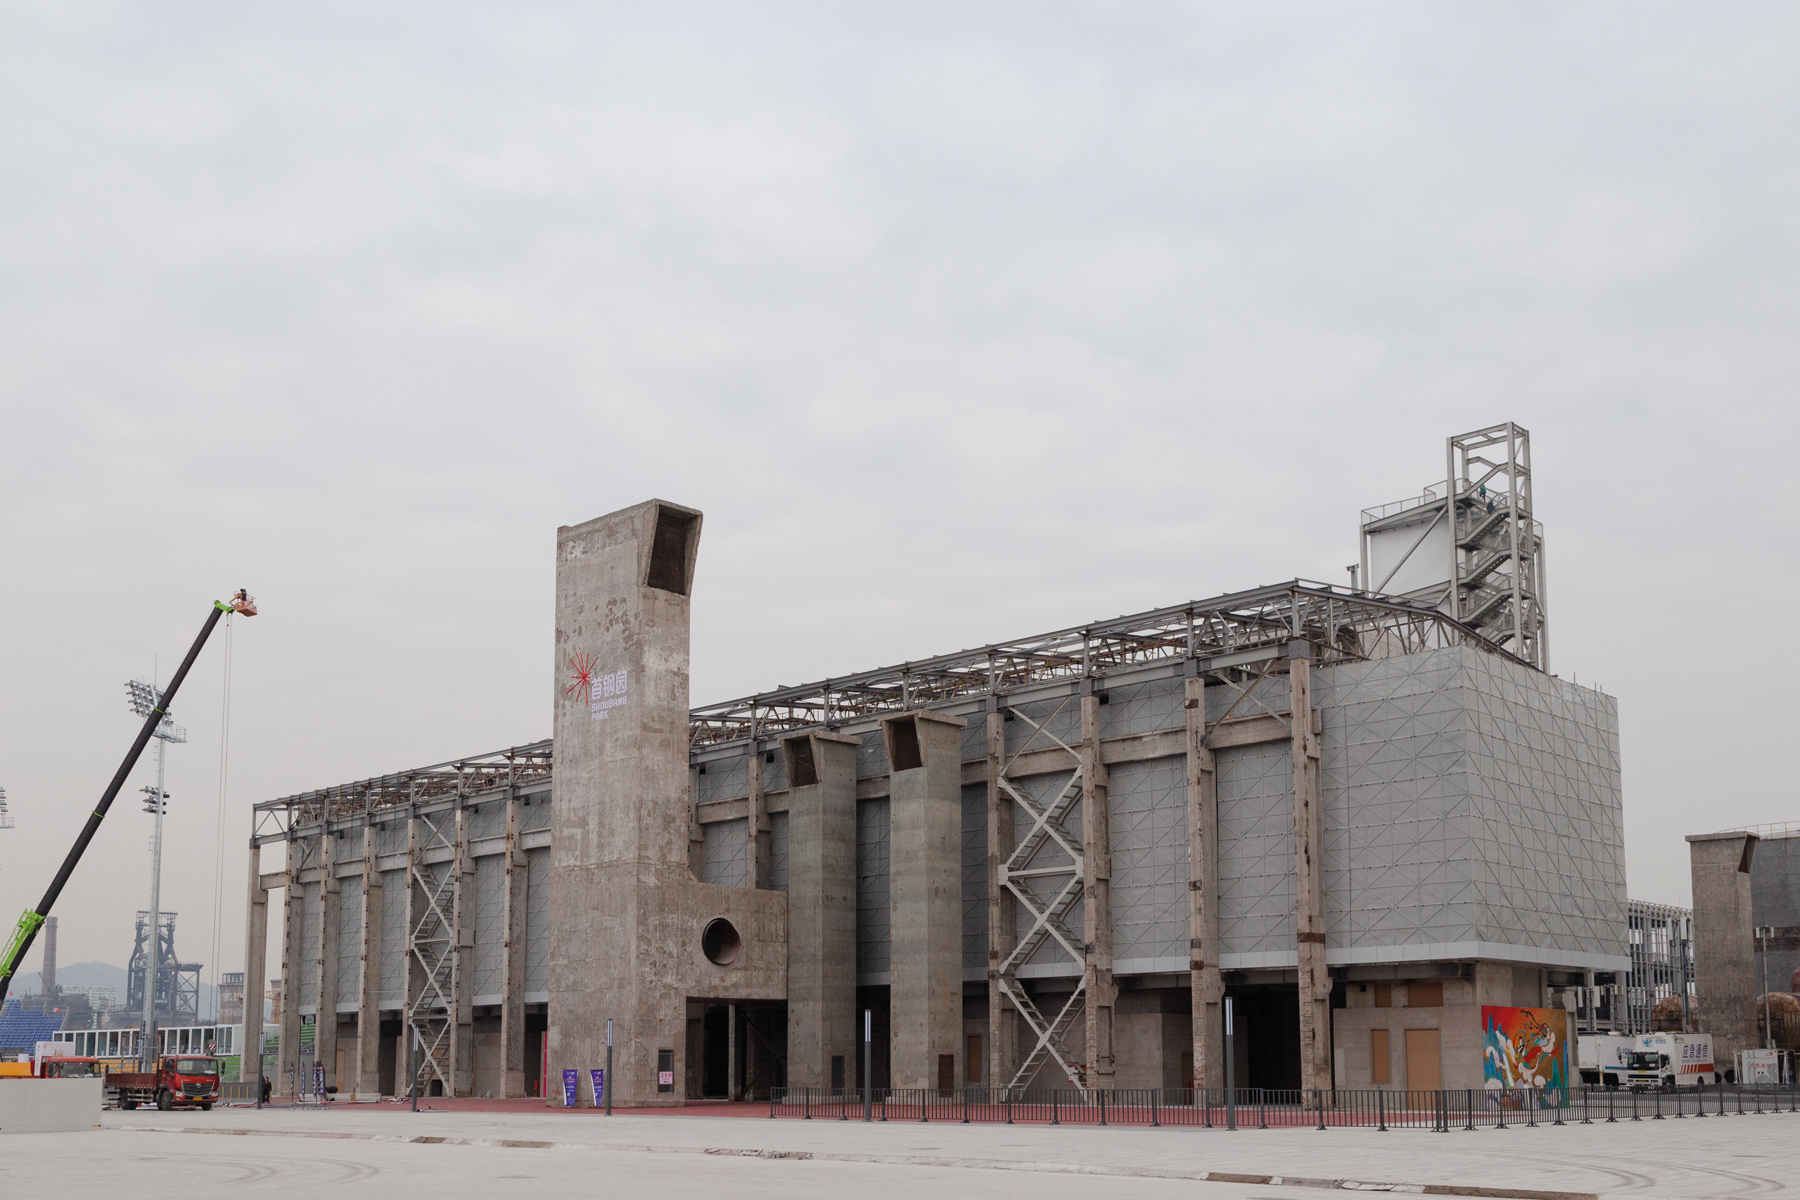 Exterior structure of derelict Shougang Oxygen Factory, THE STORY OF A SECTION in black font on white banner to left.